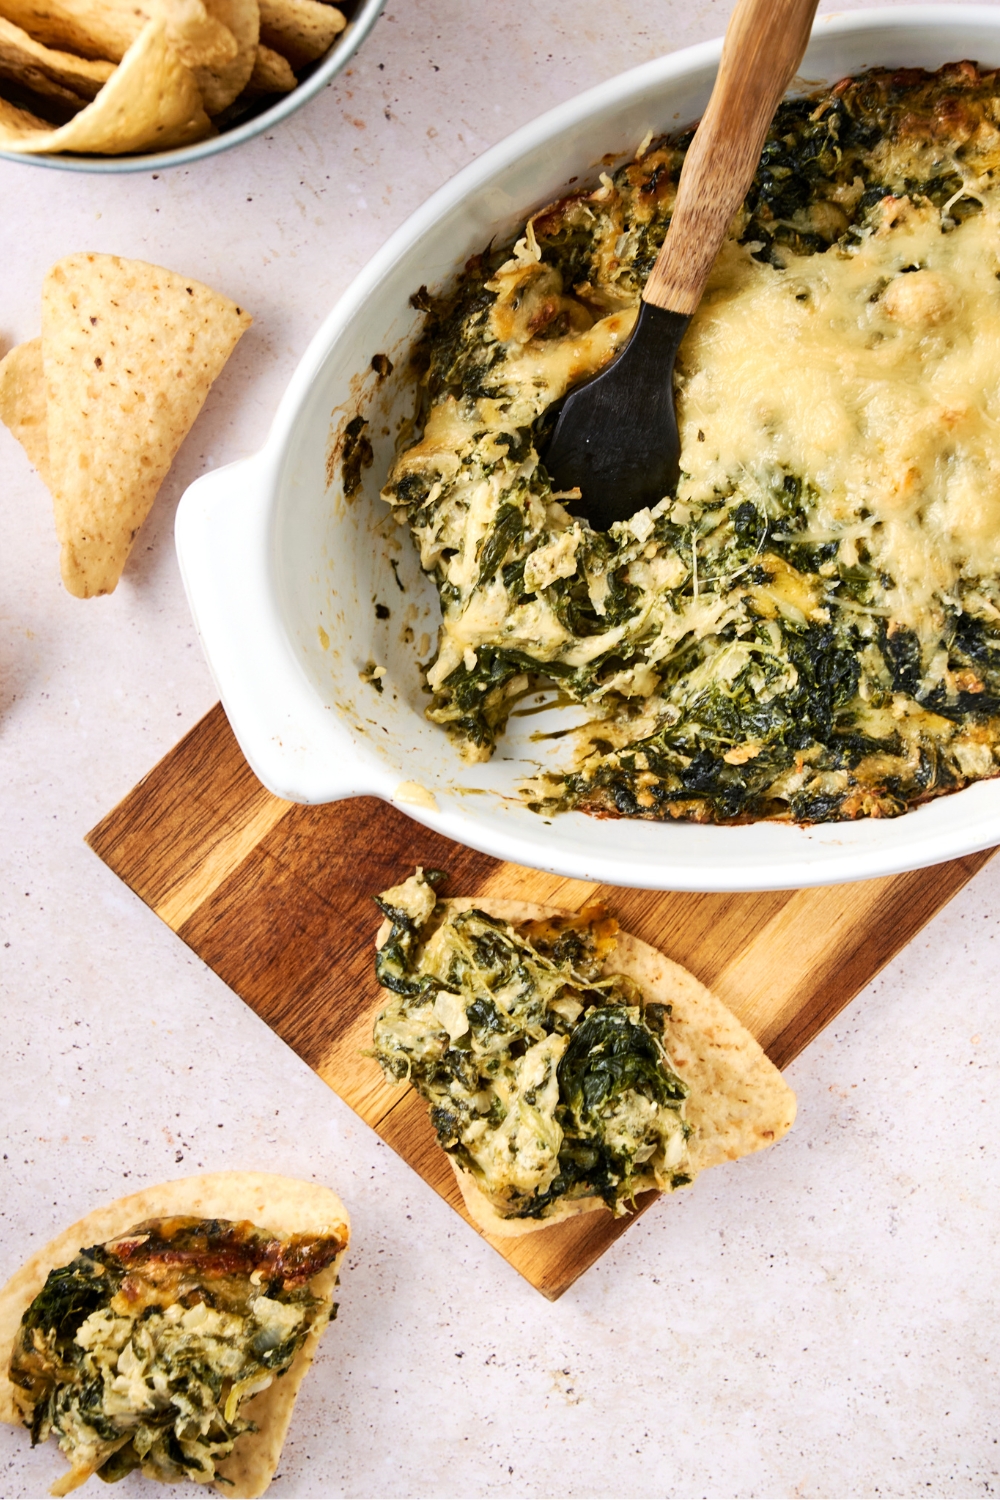 A casserole dish with baked Cheddar's spinach dip on a wooden serving board. Tortilla chips are next to the board. Two tortilla chips have heaping scoops of the spinach dip on it.